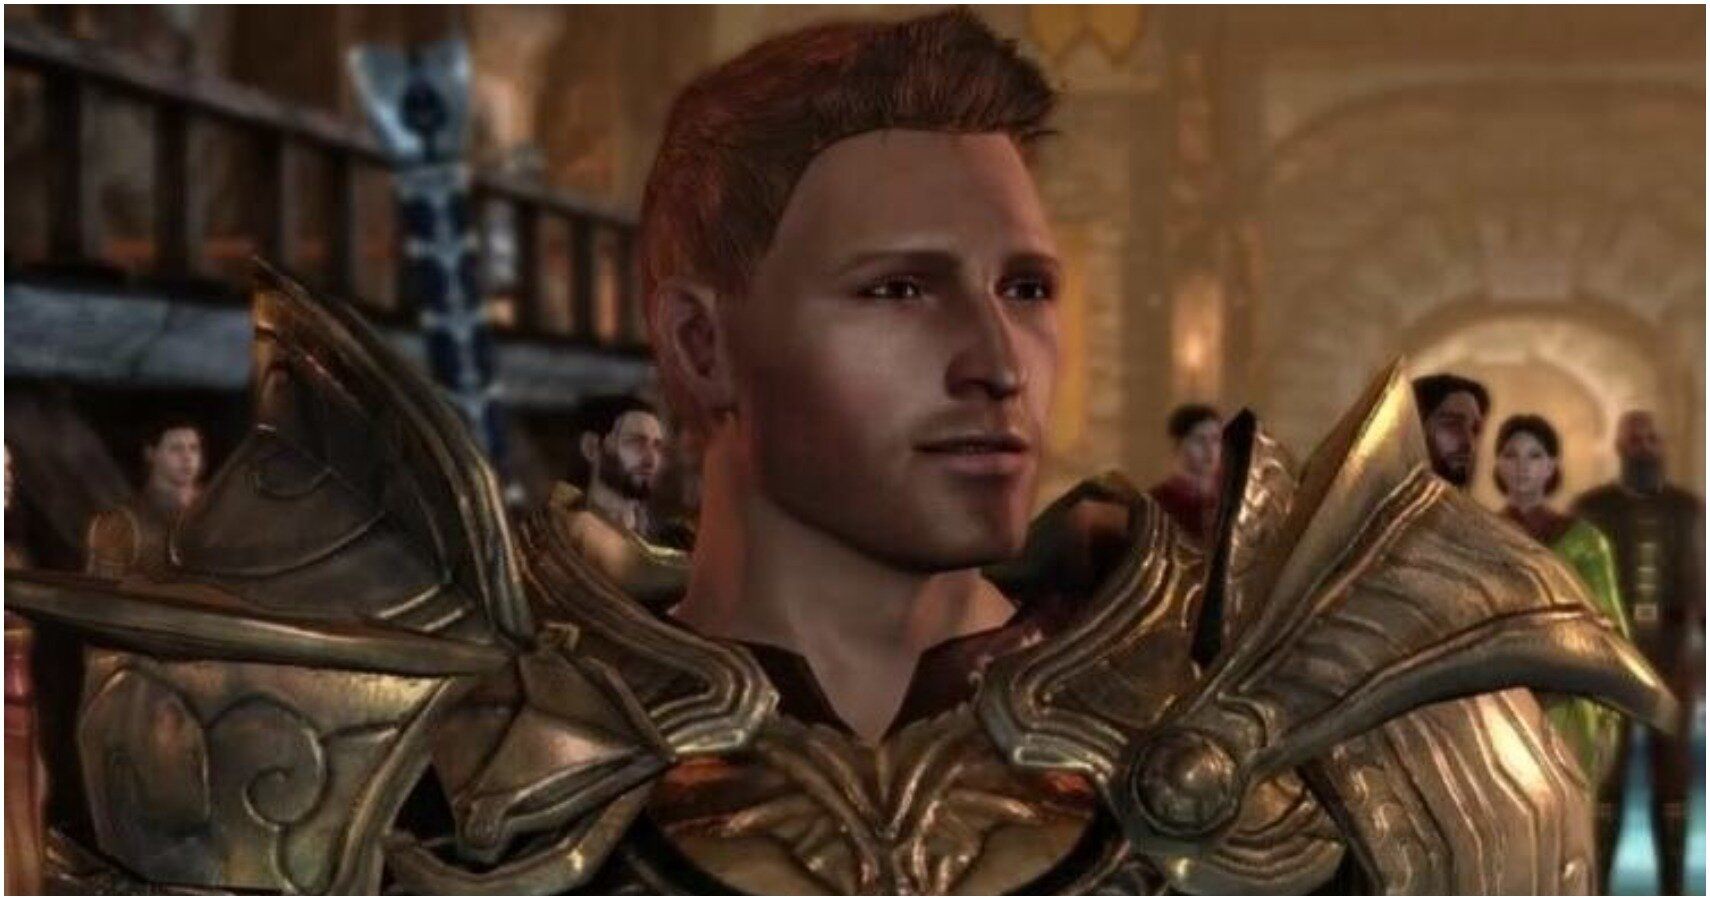 Dragon Age origins 2 and Inquisition Stickers Alistair 